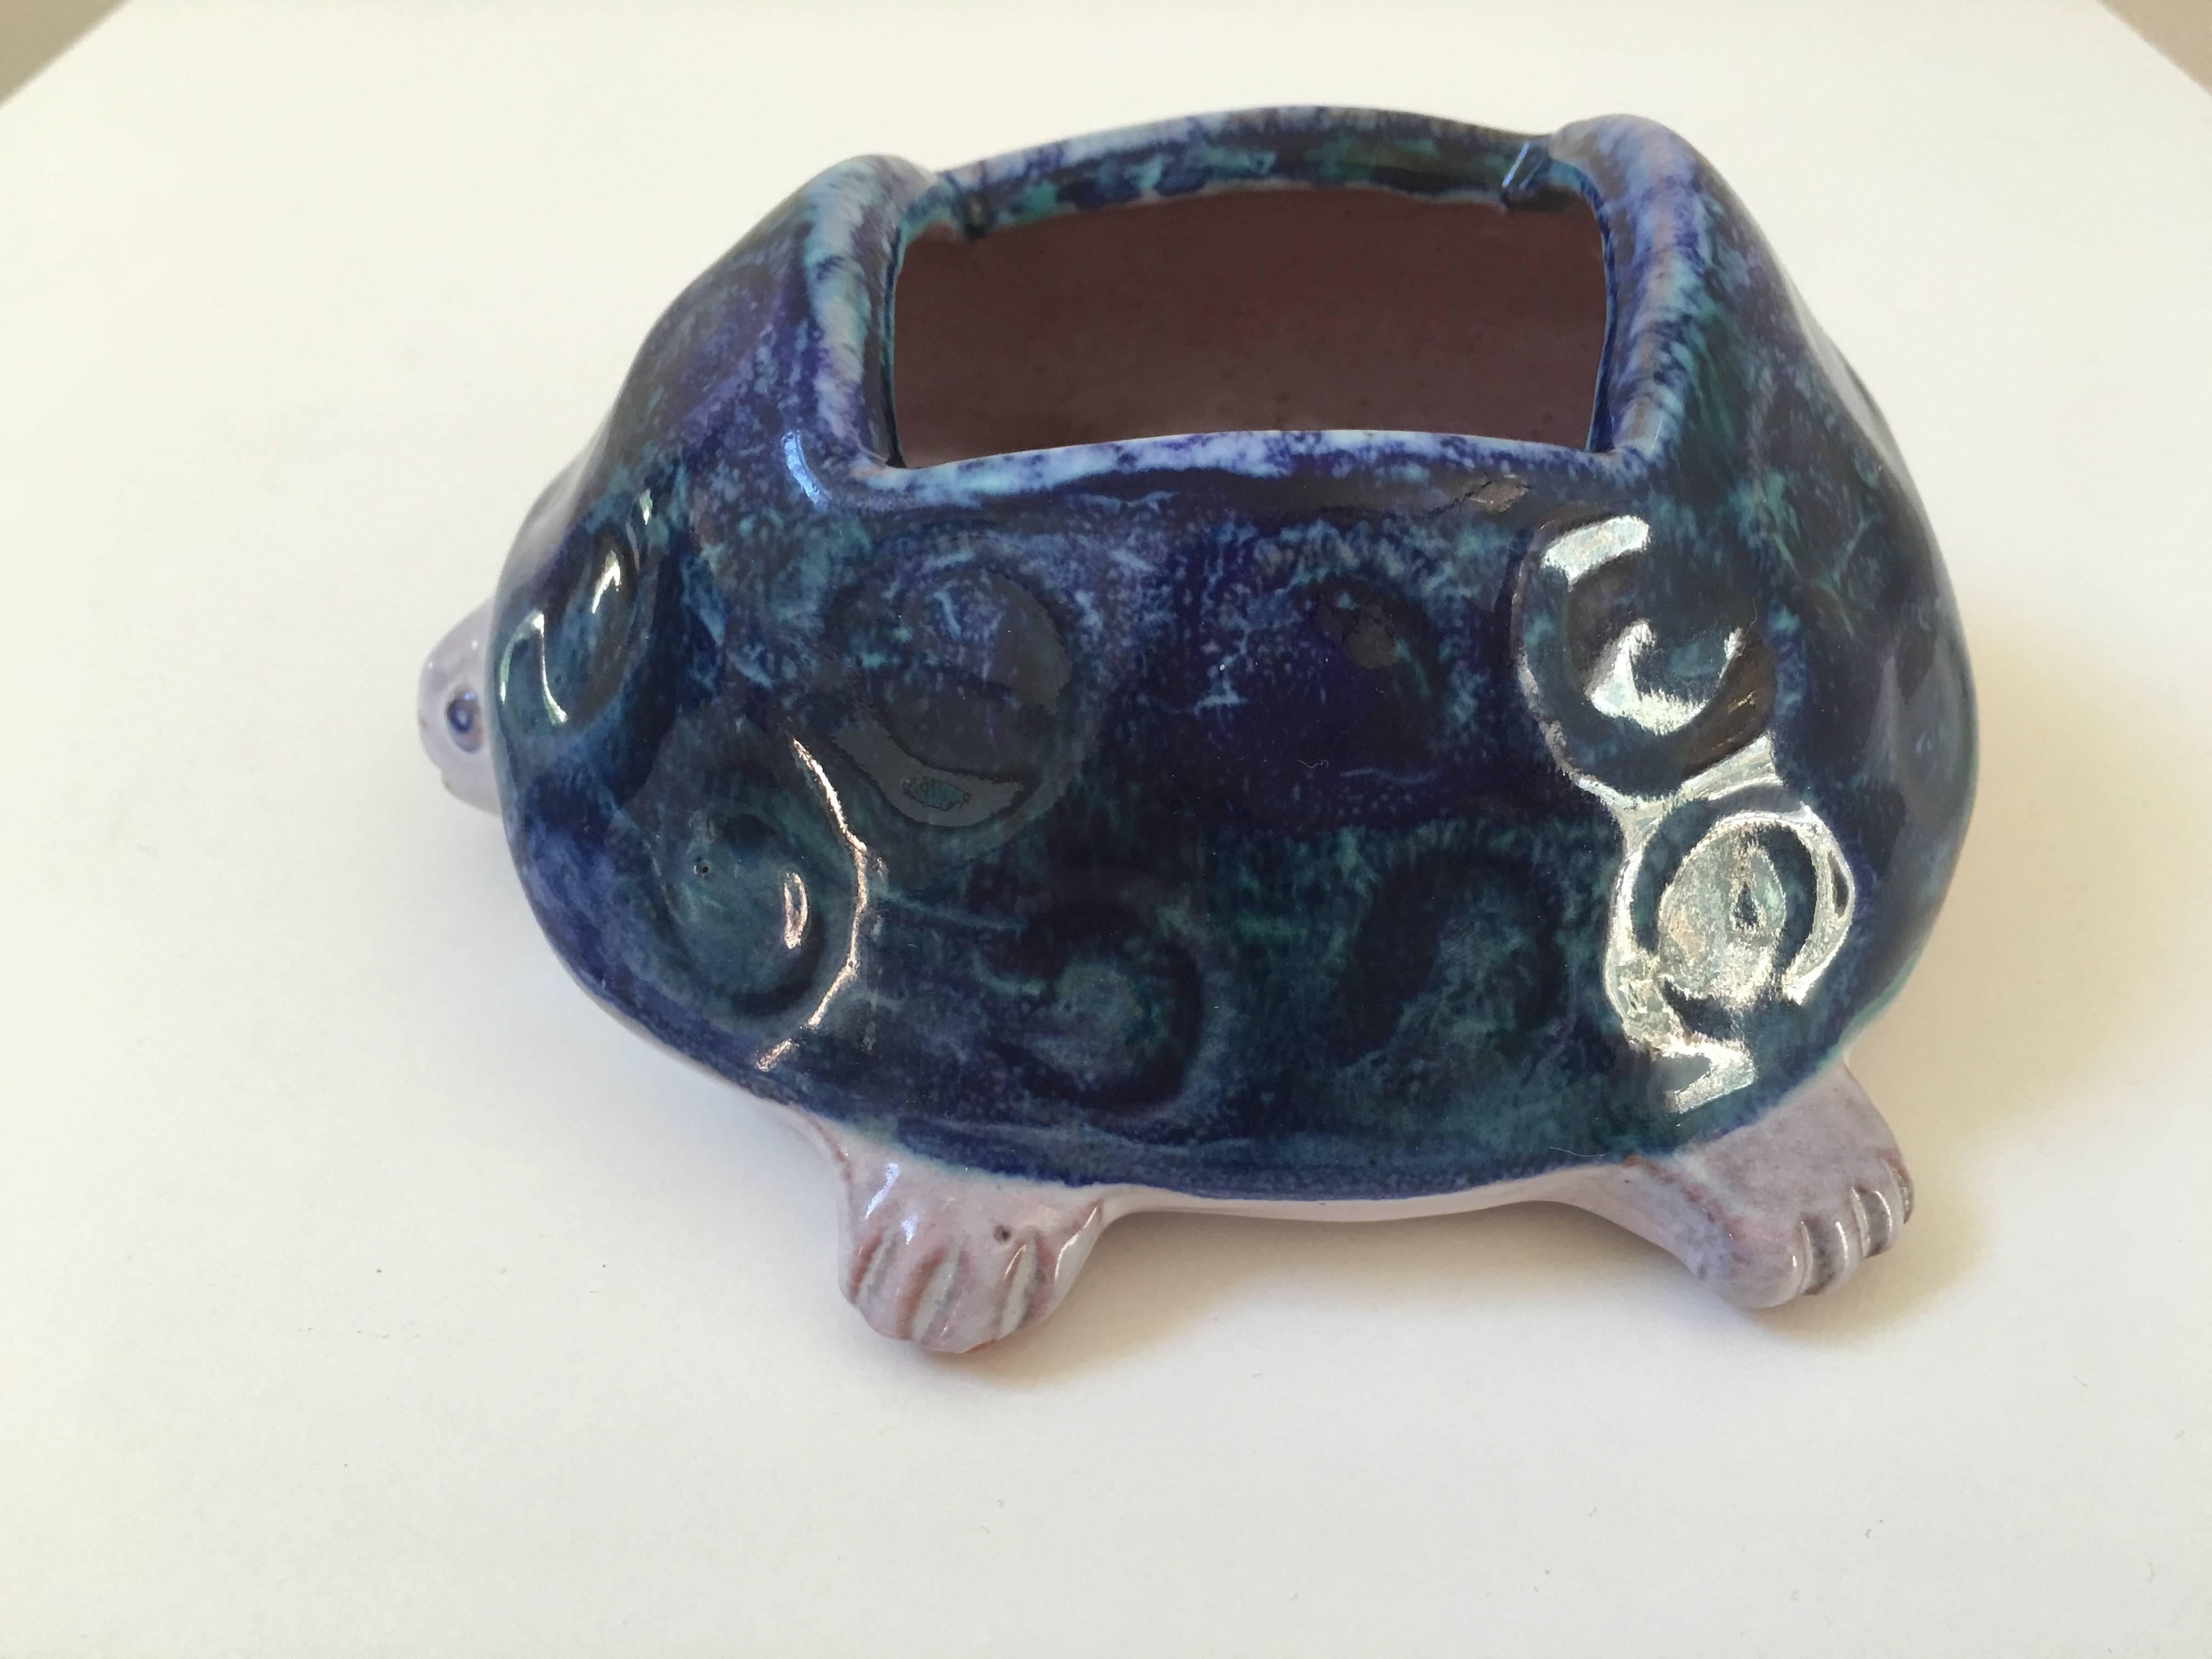 Turtle Ceramic Sculpture by Robert & Jean Cloutier, Signed In Excellent Condition For Sale In Ashburn, VA